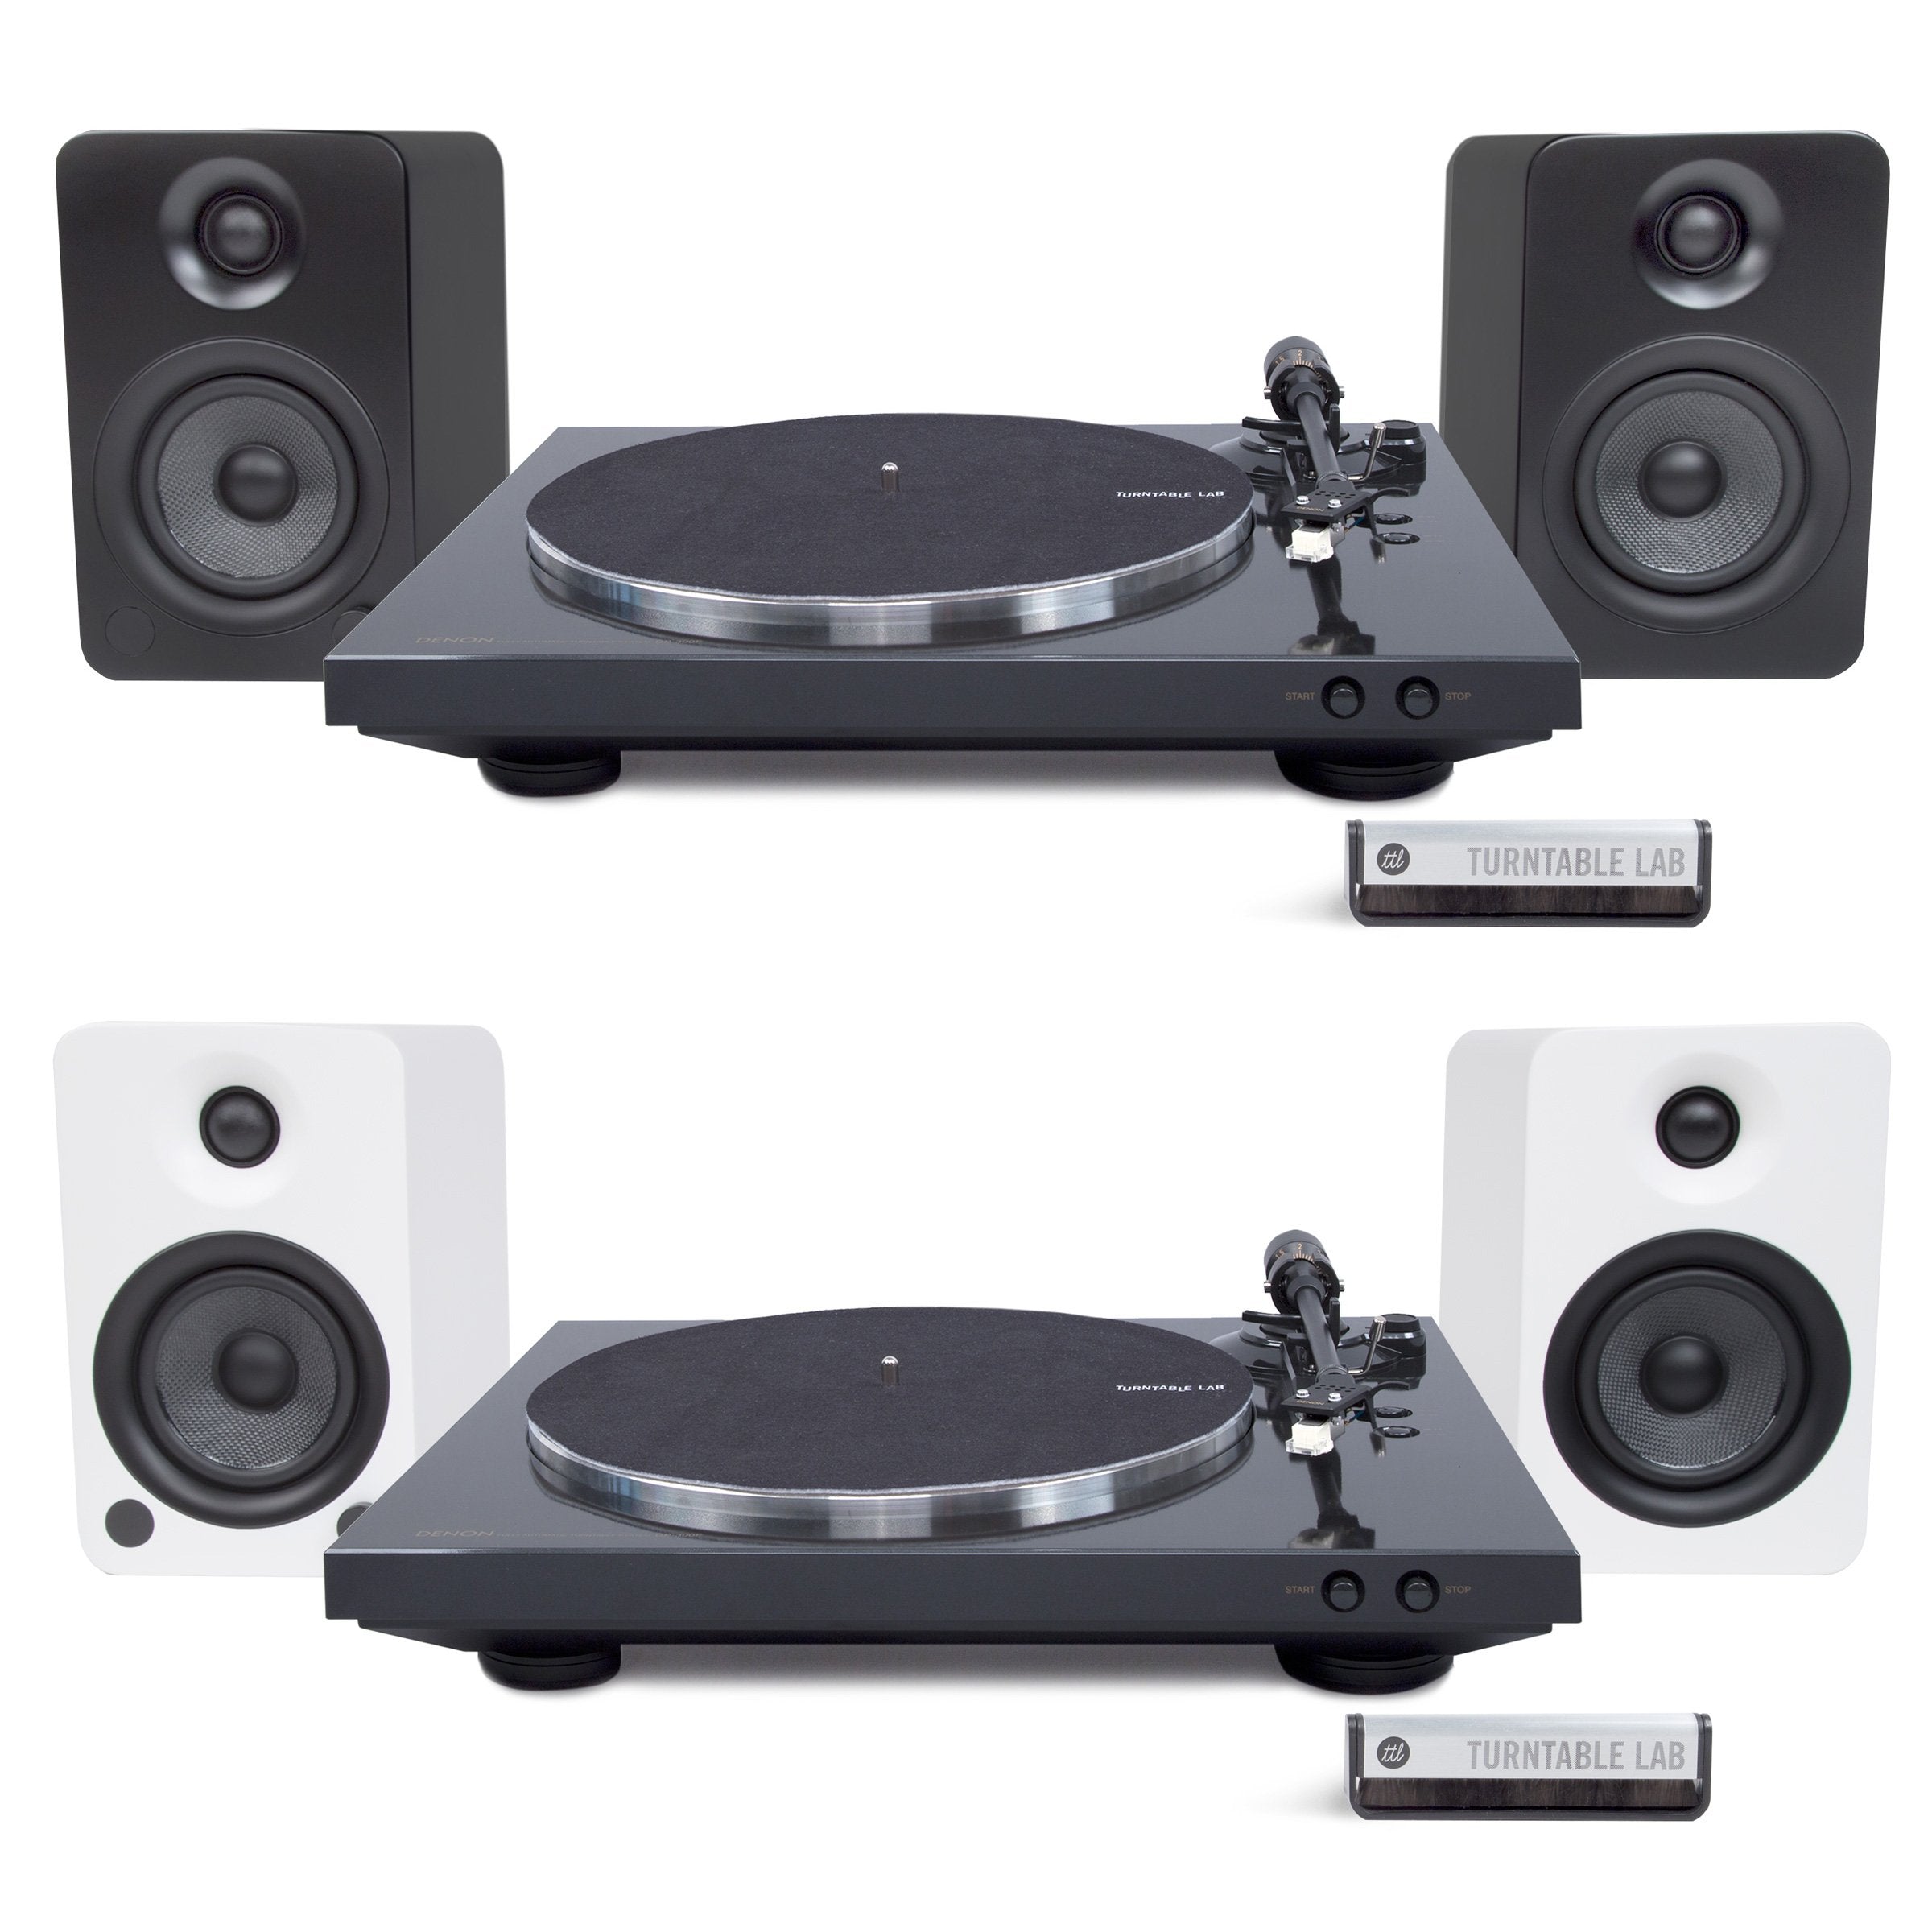 Denon: DP-300F / Kanto YU4 / Turntable Package